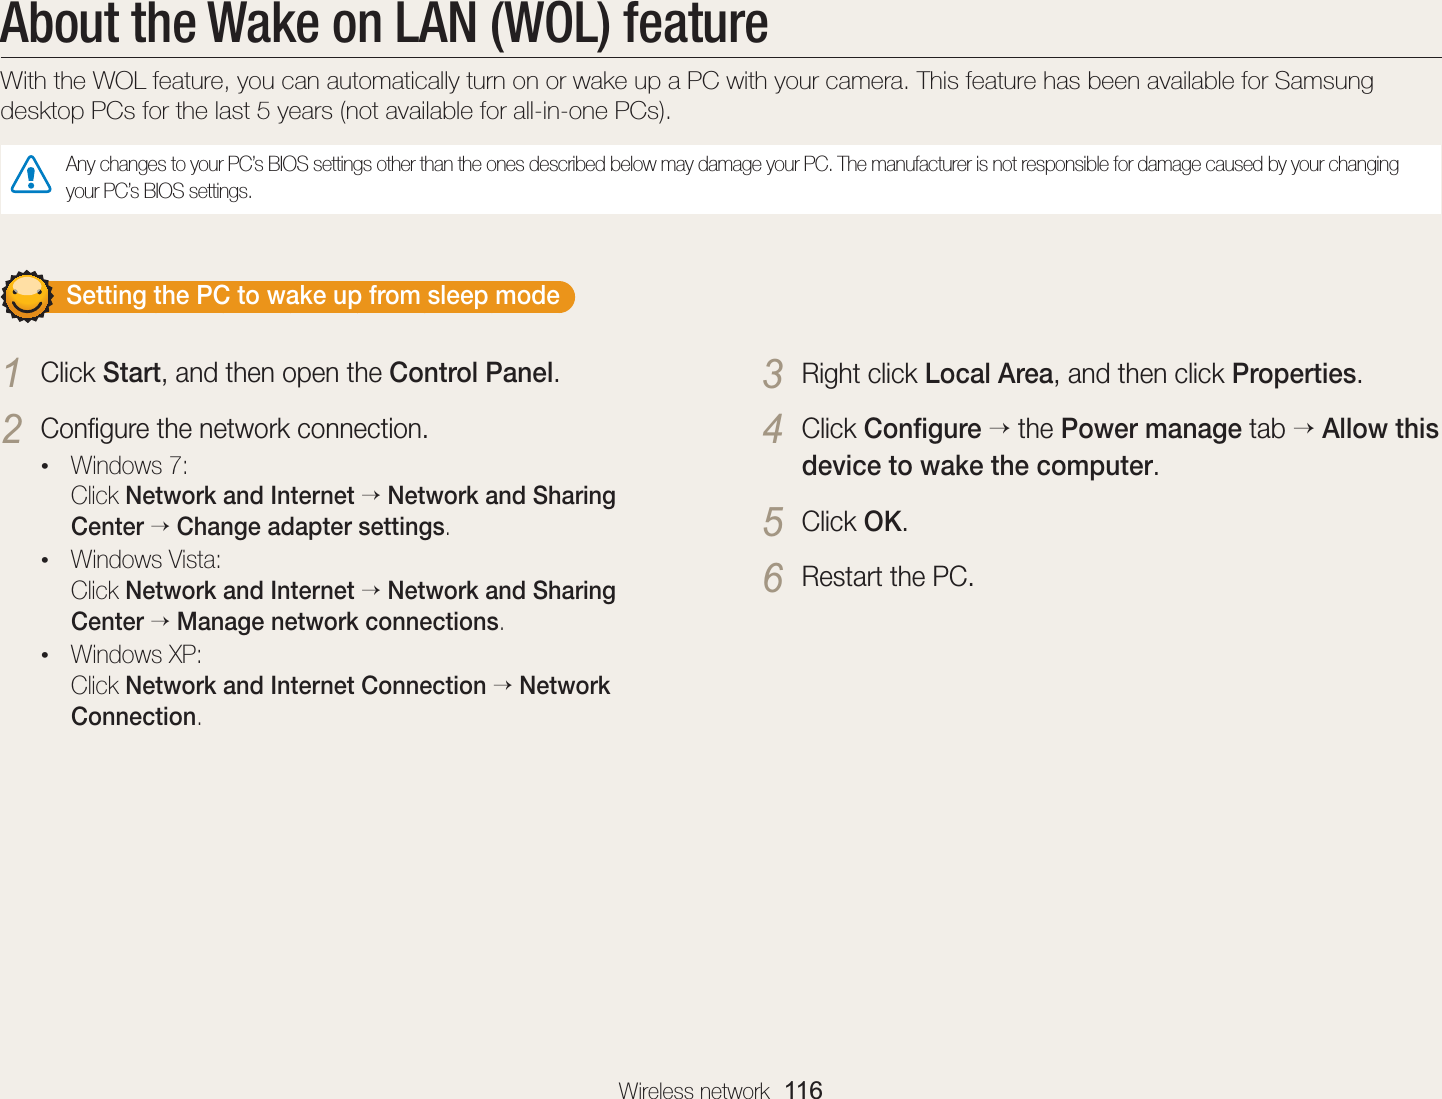 Wireless network  116About the Wake on LAN (WOL) featureWith the WOL feature, you can automatically turn on or wake up a PC with your camera. This feature has been available for Samsung desktop PCs for the last 5 years (not available for all-in-one PCs).Any changes to your PC’s BIOS settings other than the ones described below may damage your PC. The manufacturer is not responsible for damage caused by your changing your PC’s BIOS settings.       Setting the PC to wake up from sleep mode1 Click Start, and then open the Control Panel.2 Conﬁgure the network connection.• Windows 7: Click Network and Internet  Network and Sharing Center  Change adapter settings.• Windows Vista: Click Network and Internet  Network and Sharing Center  Manage network connections.• Windows XP: Click Network and Internet Connection  Network Connection.3 Right click Local Area, and then click Properties.4 Click Conﬁgure  the Power manage tab  Allow this device to wake the computer.5 Click OK.6 Restart the PC.